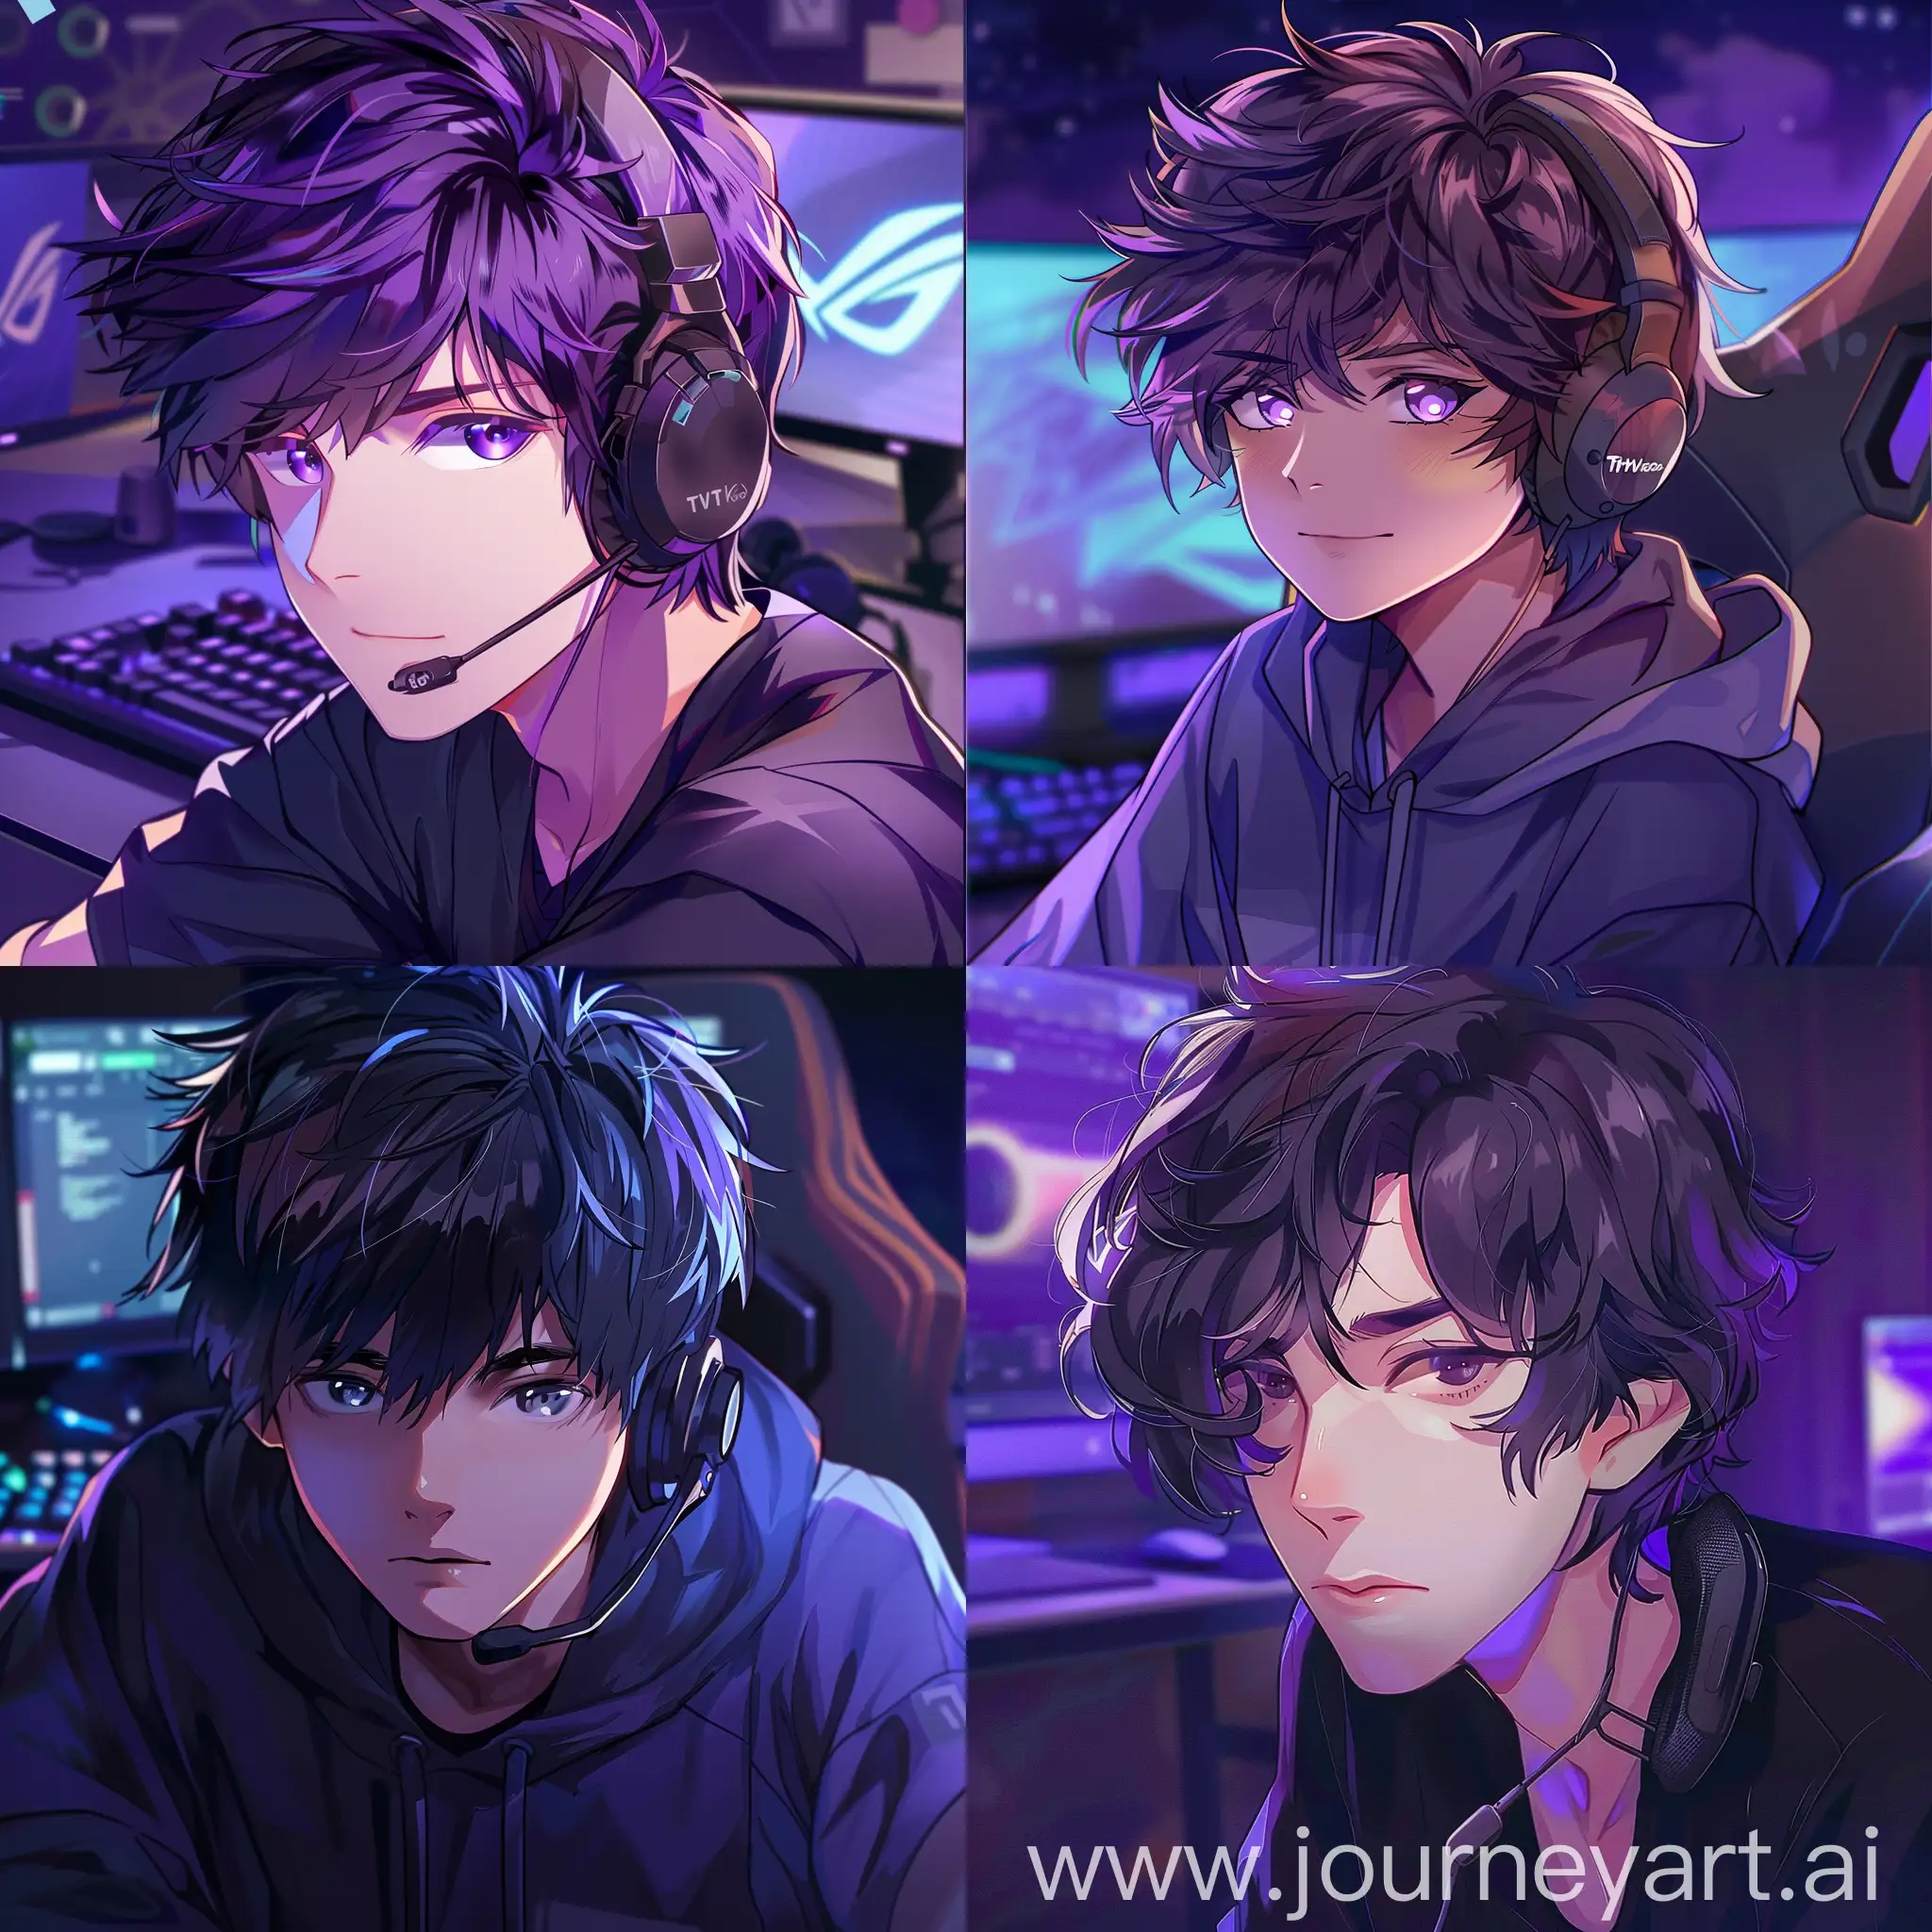 Handsome-Anime-Boy-Streaming-on-Vibrant-Twitch-Background